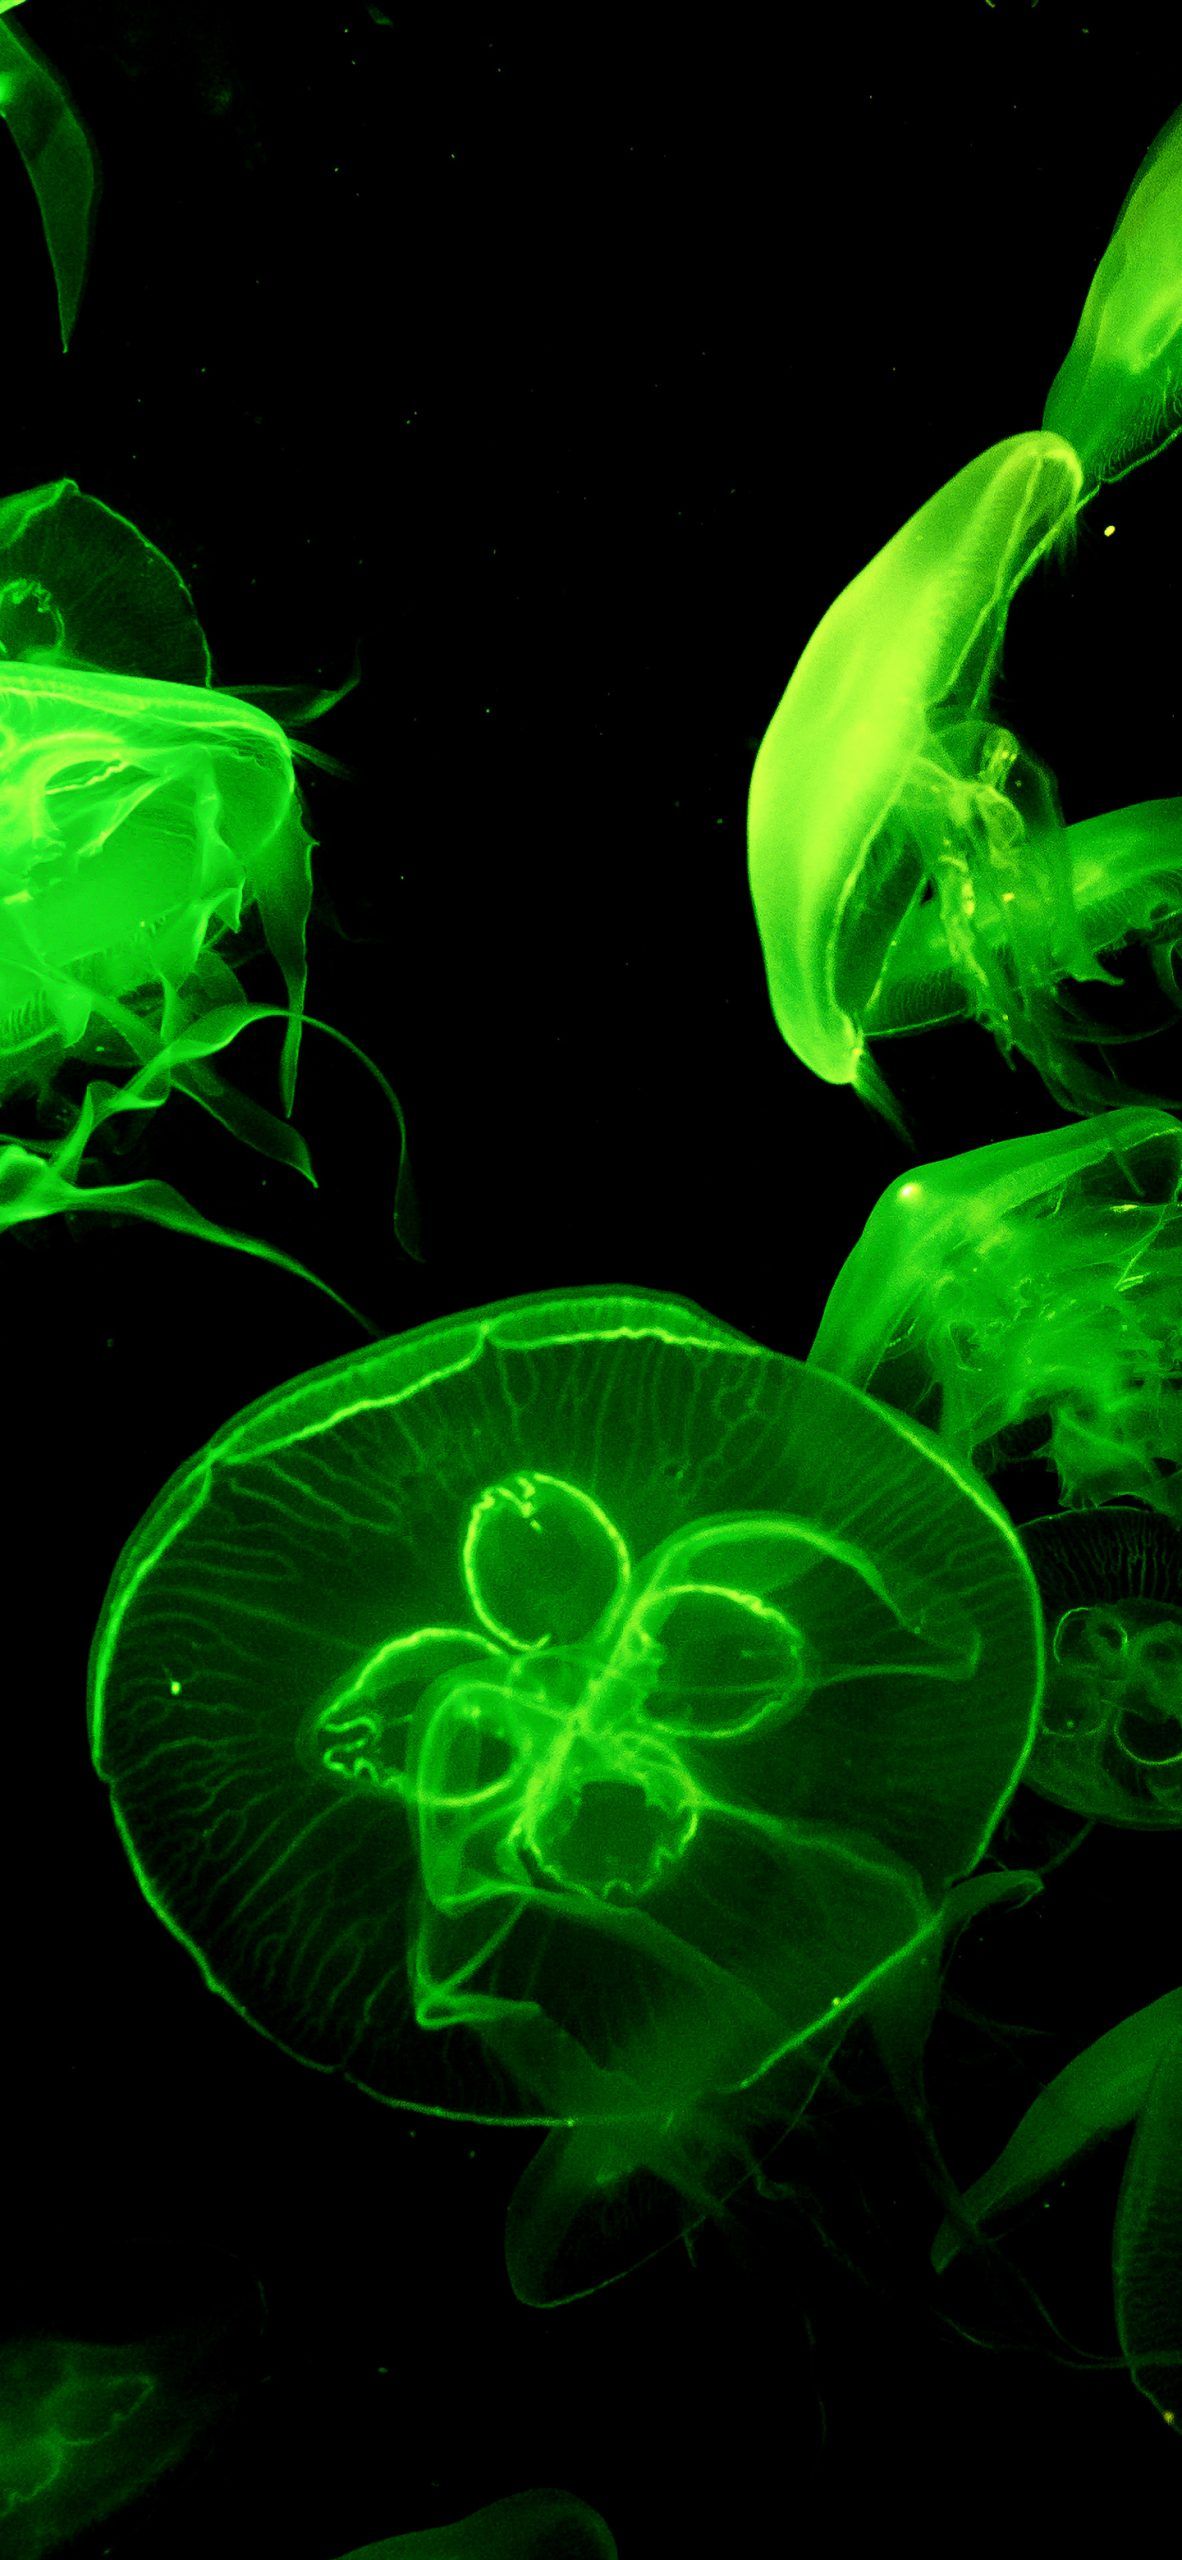 Green Jelly Fishes Amoled Wallpaper